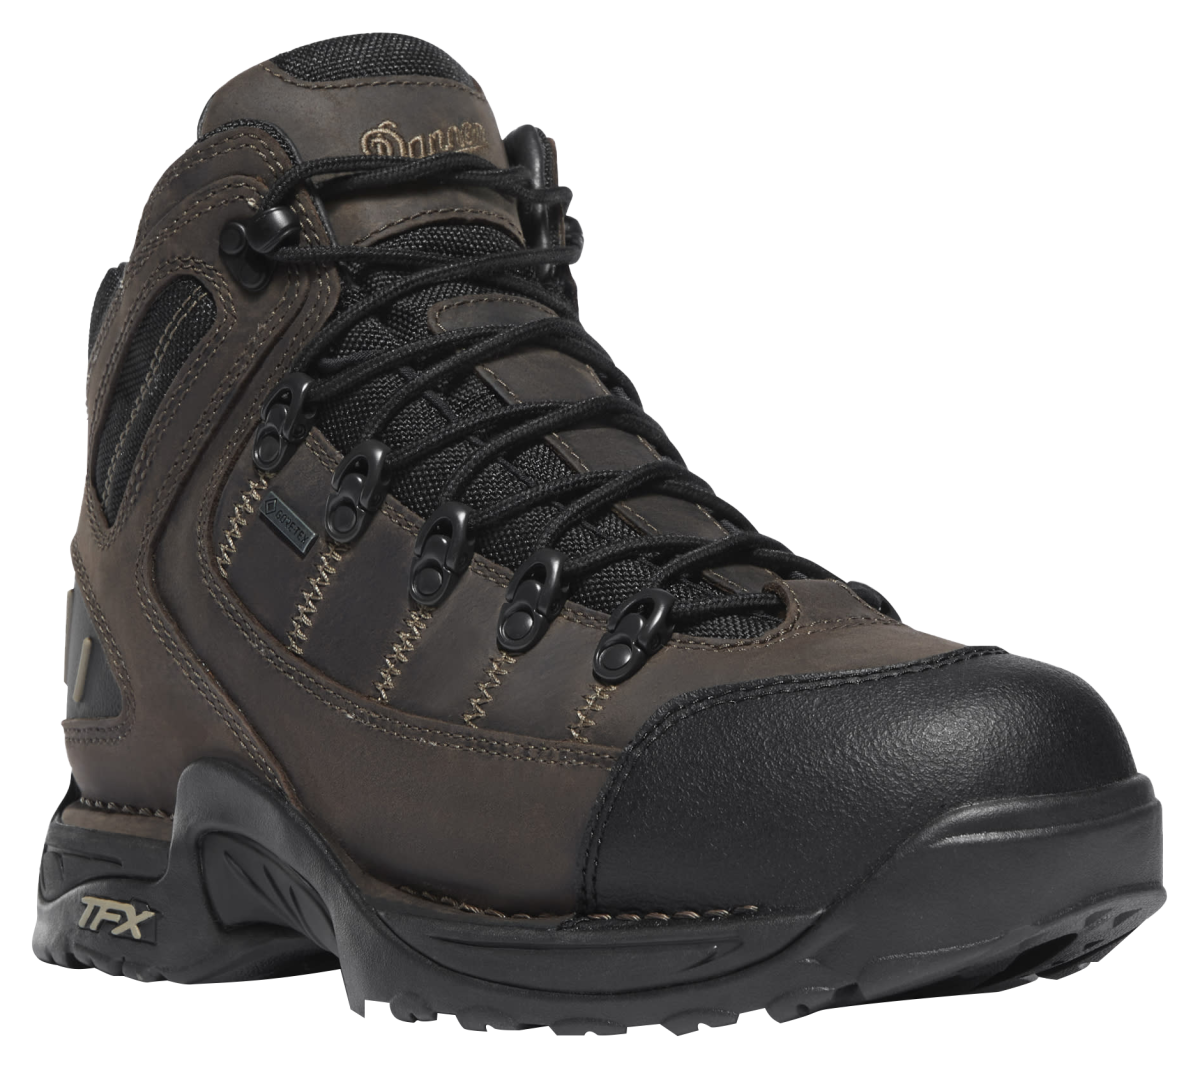 Danner 453 GORE-TEX Waterproof Hiking Boots for Men - Loam Brown/Chocolate Chip - 14M